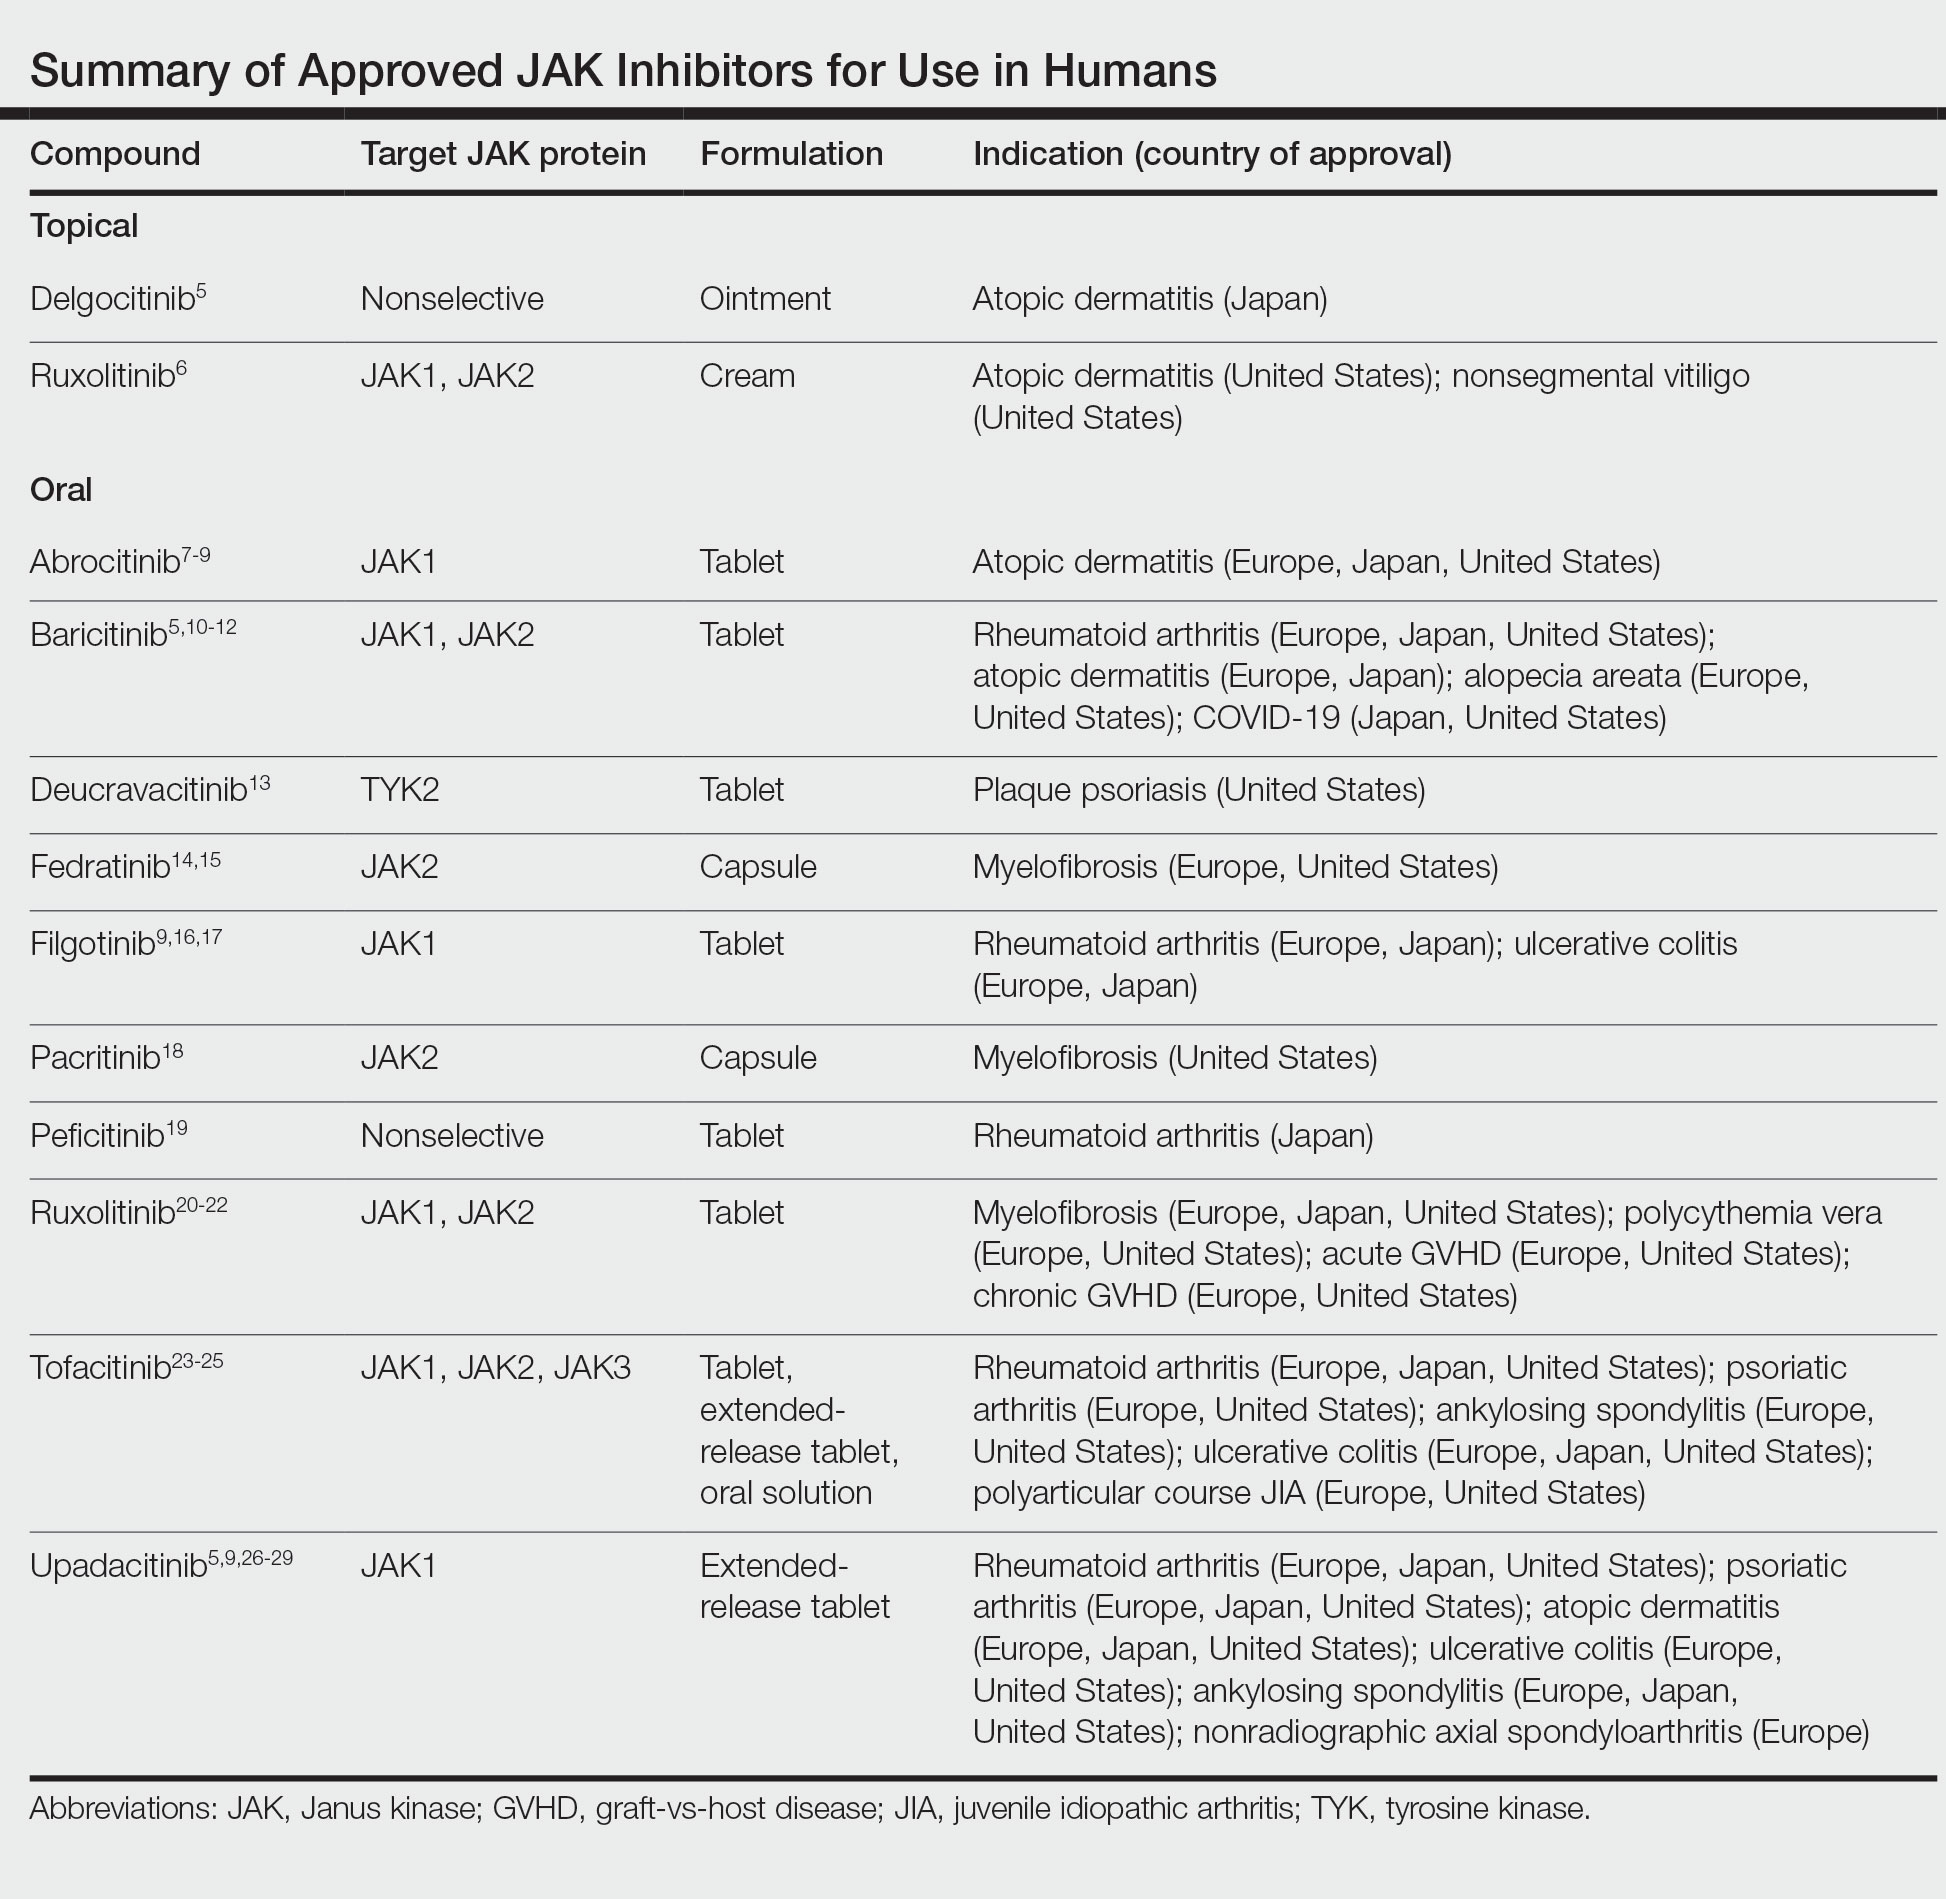 Summary of Approved JAK Inhibitors for Use in Humans